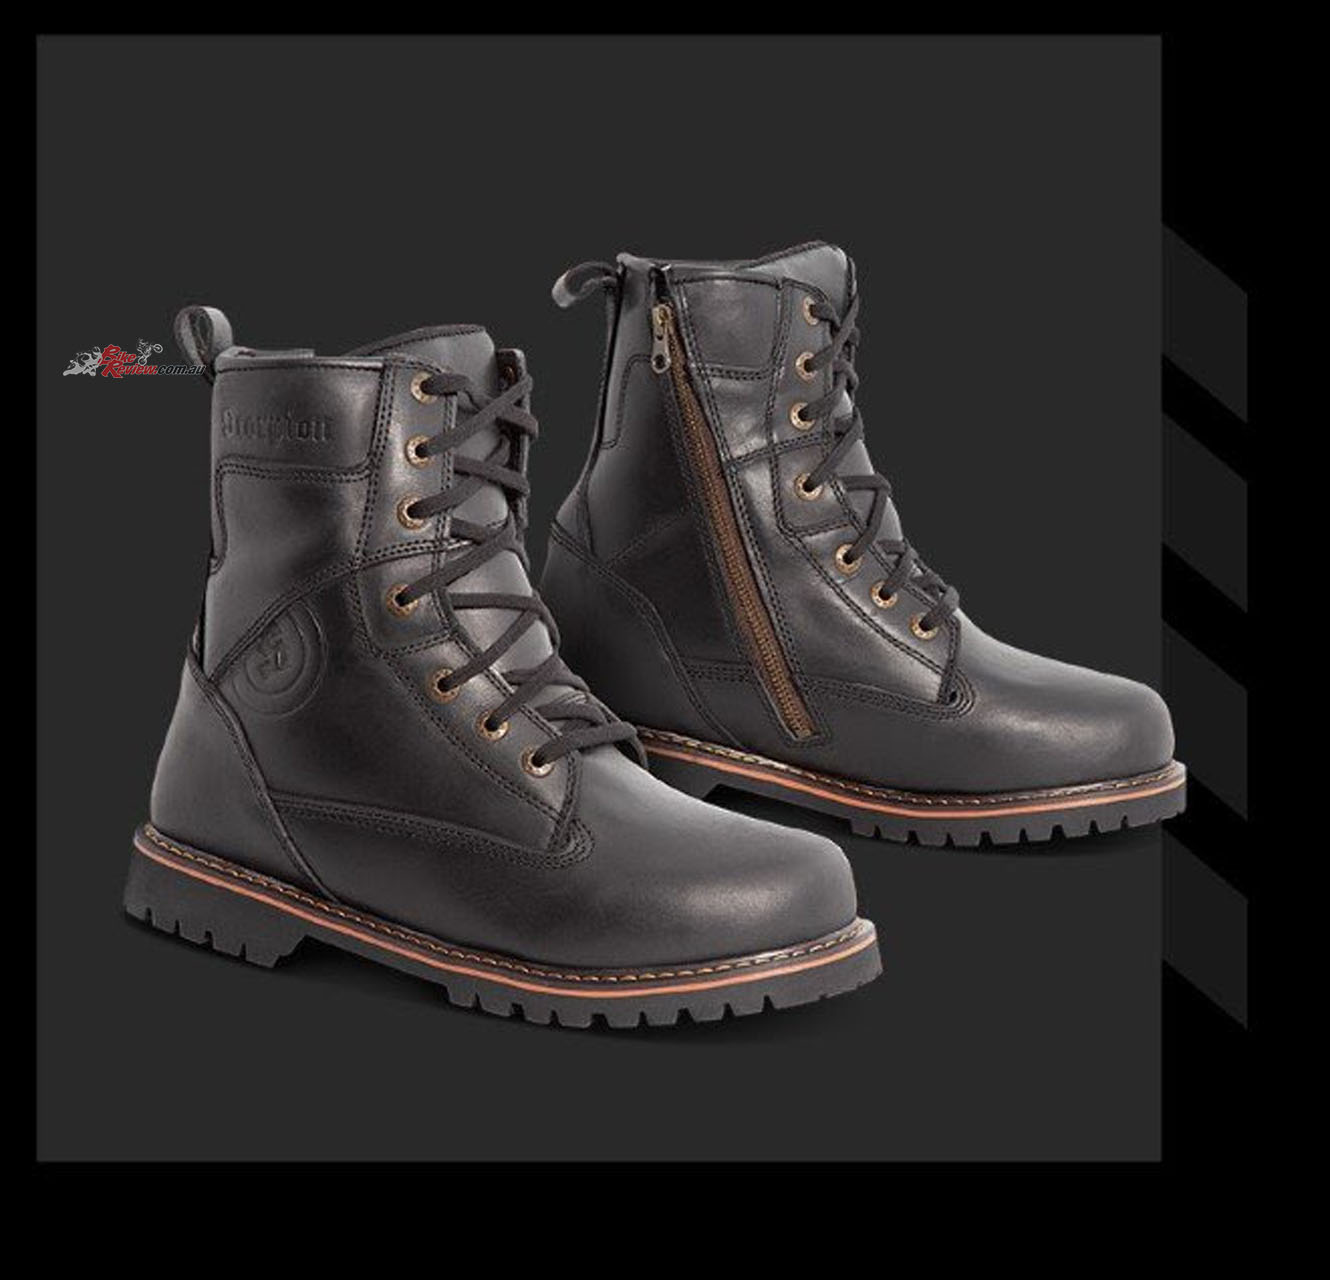 New Products: 2021 Scorpion Boots Lineup - Bike Review